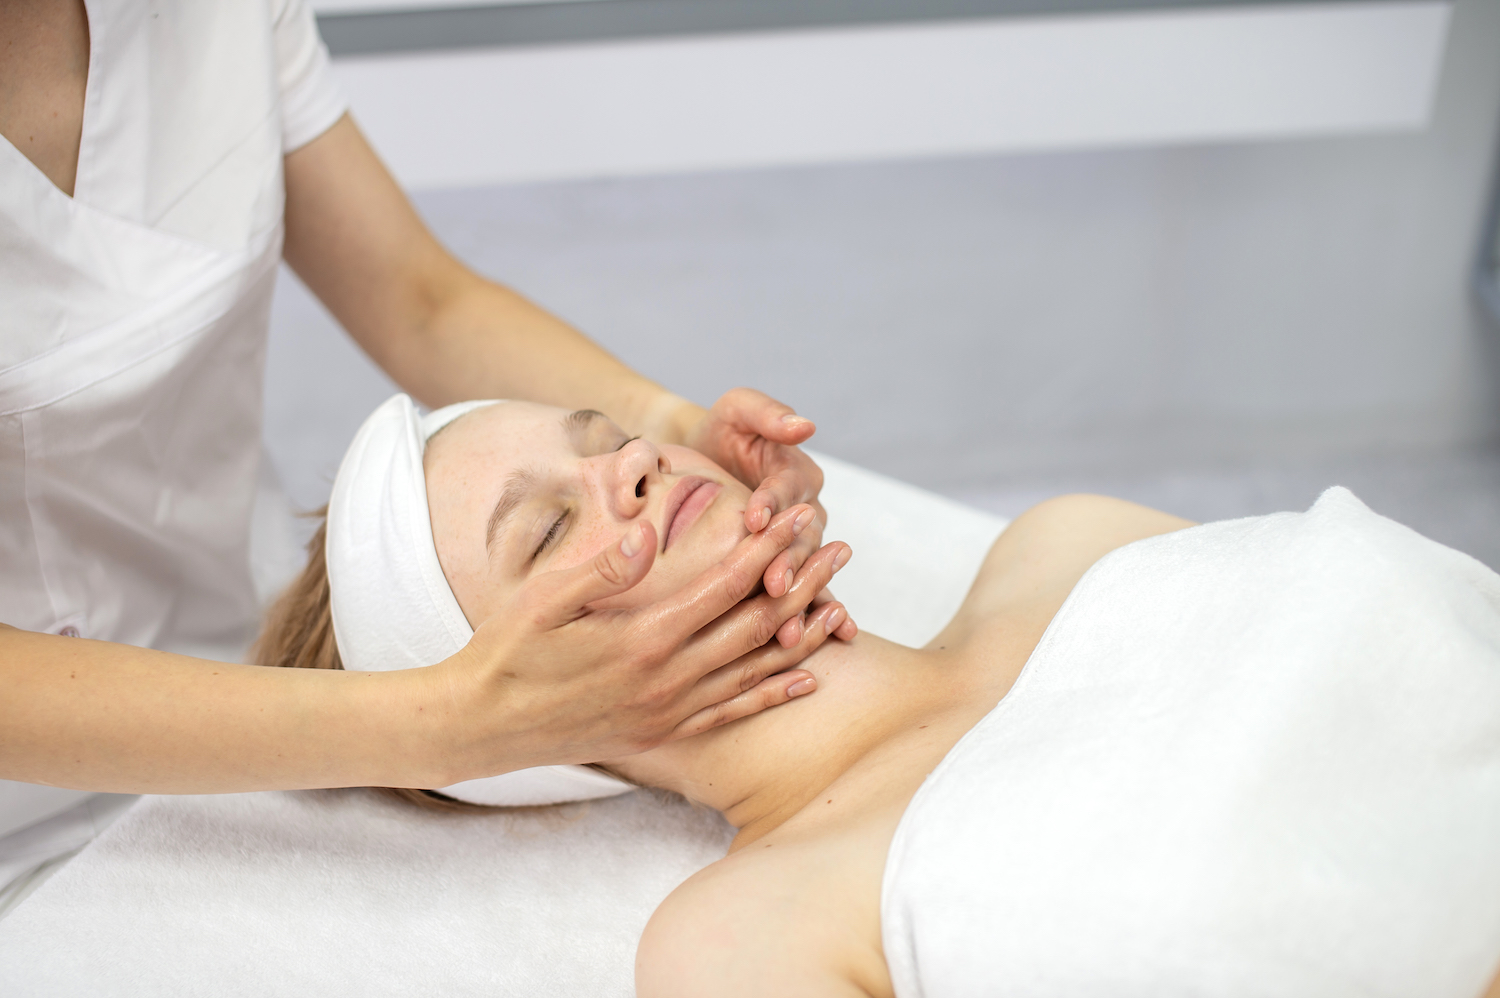 A female client closes her eyes and relaxes while receiving a facial